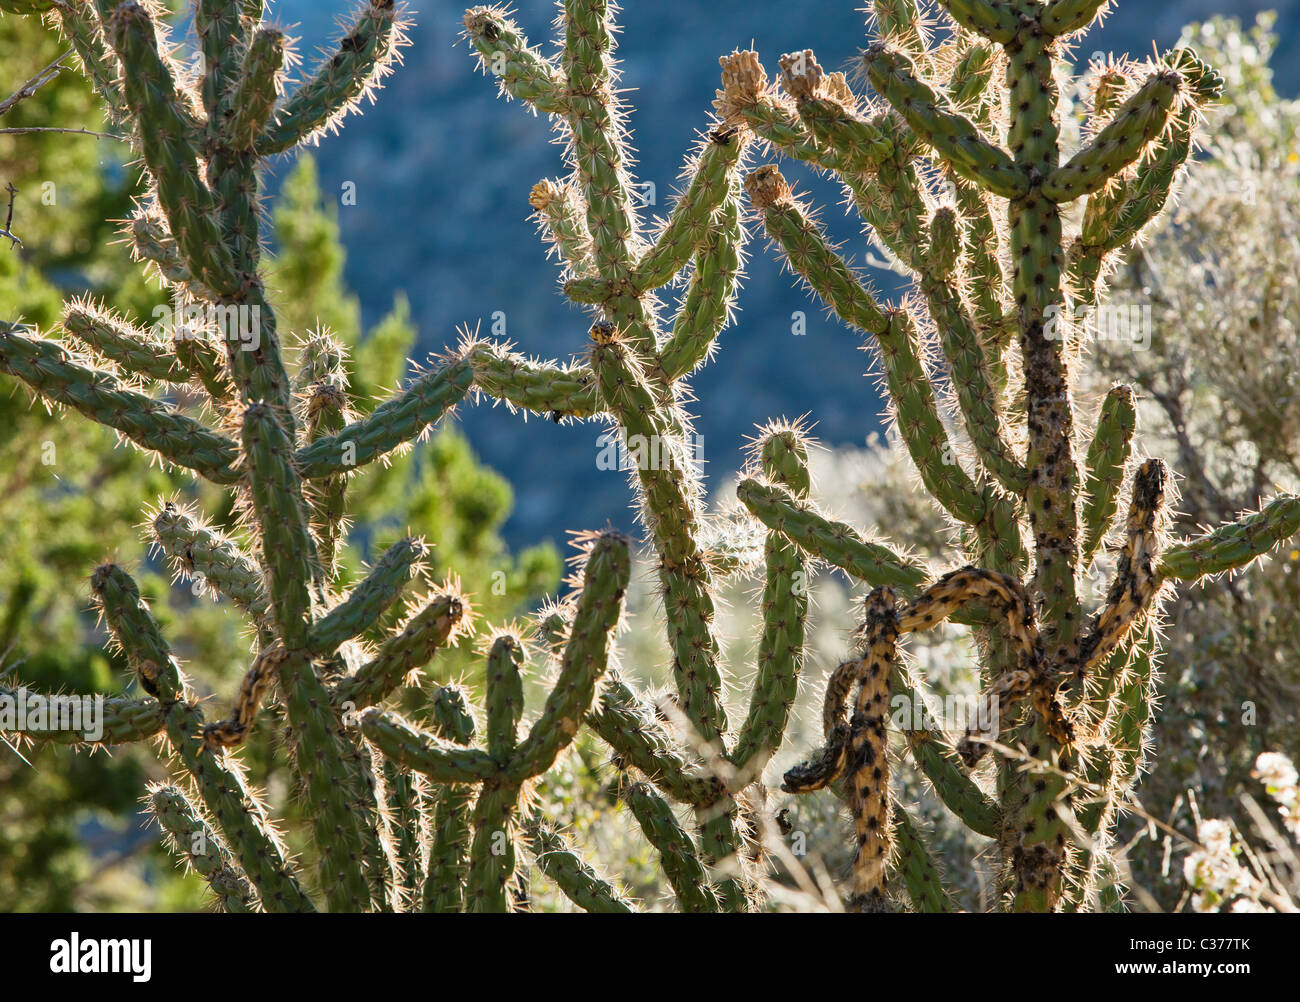 Closeup view of a Cholla cactus in the foothills of the Sandia mountains outside Albuquerque, New Mexico, USA. Stock Photo